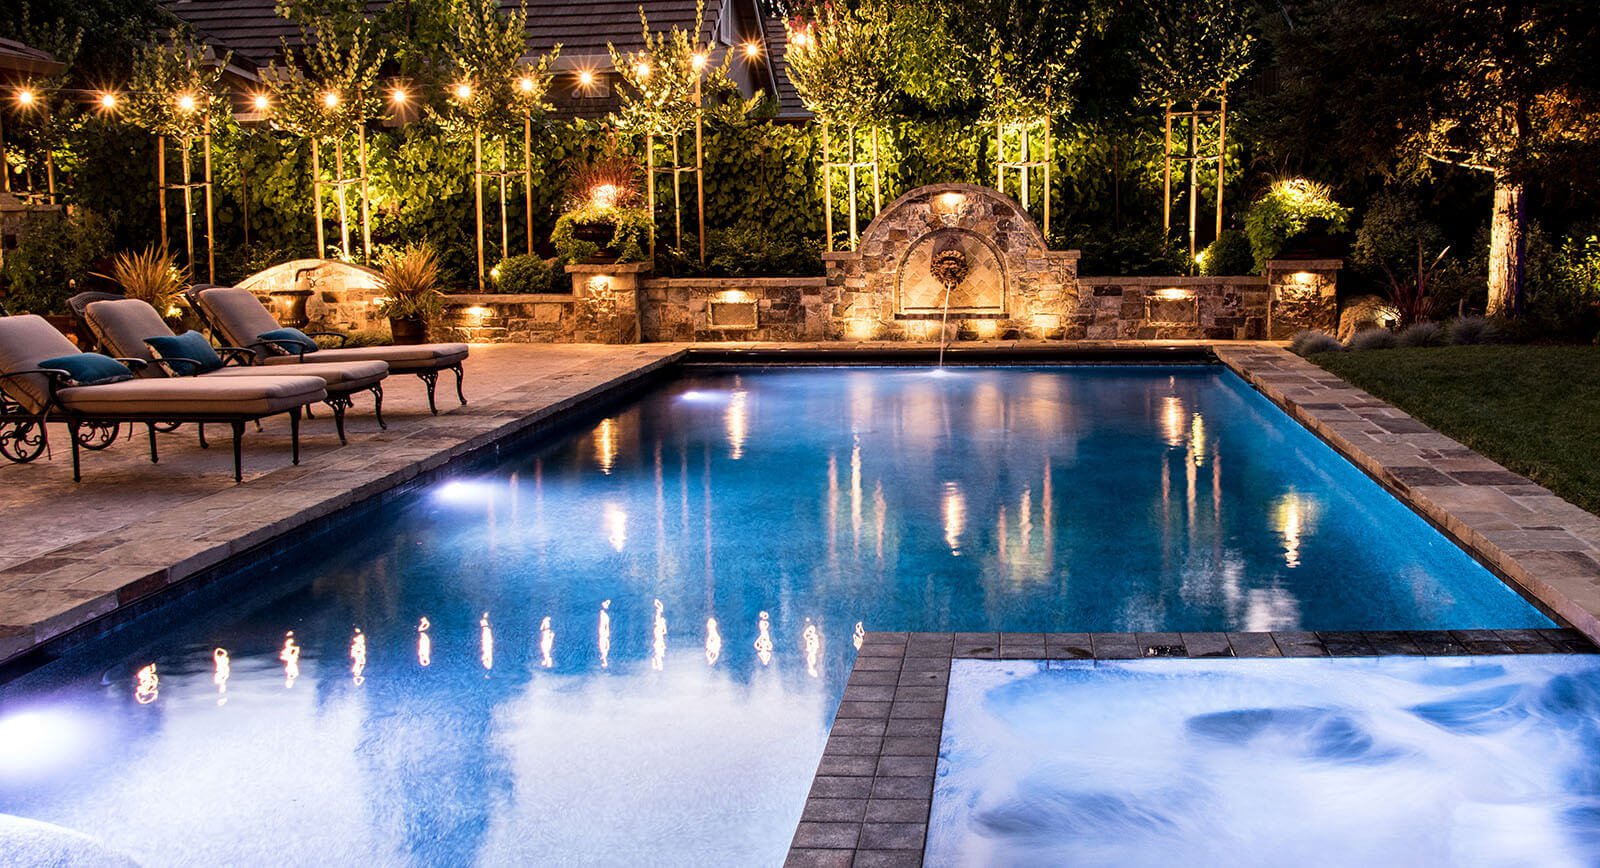 Elegantly lit pool in stone patio with lion's head fountain